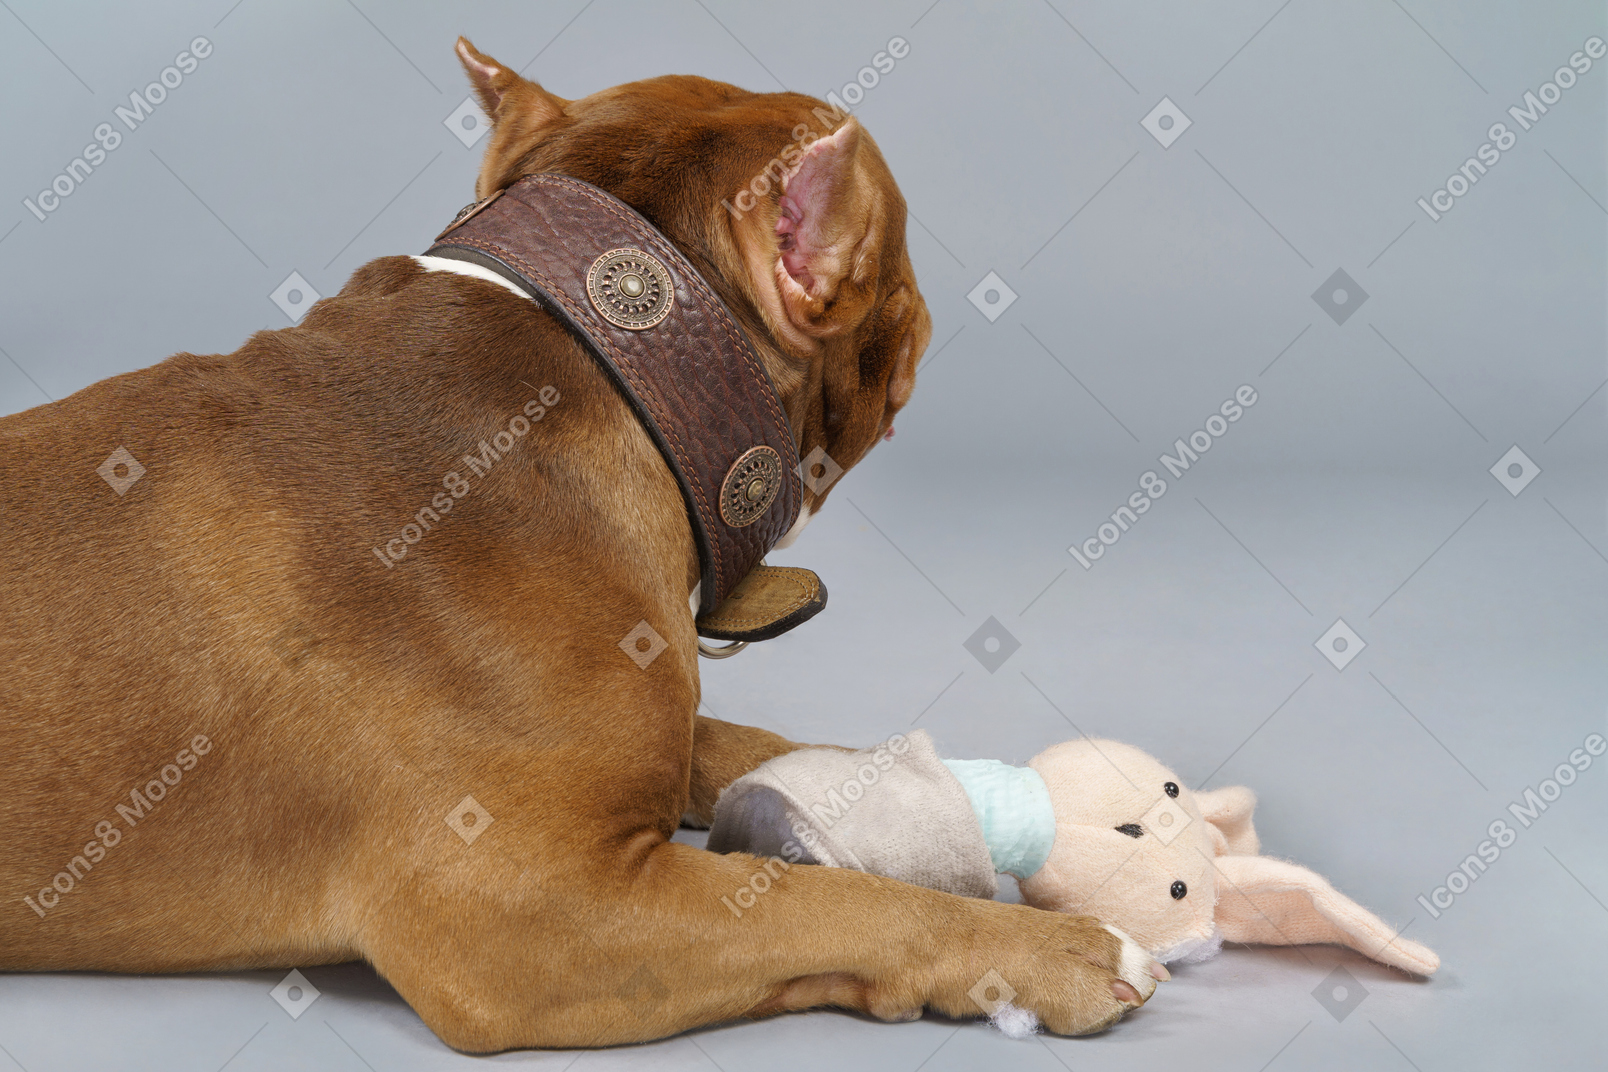 Side view of a brown bulldog with a toy bunny looking back